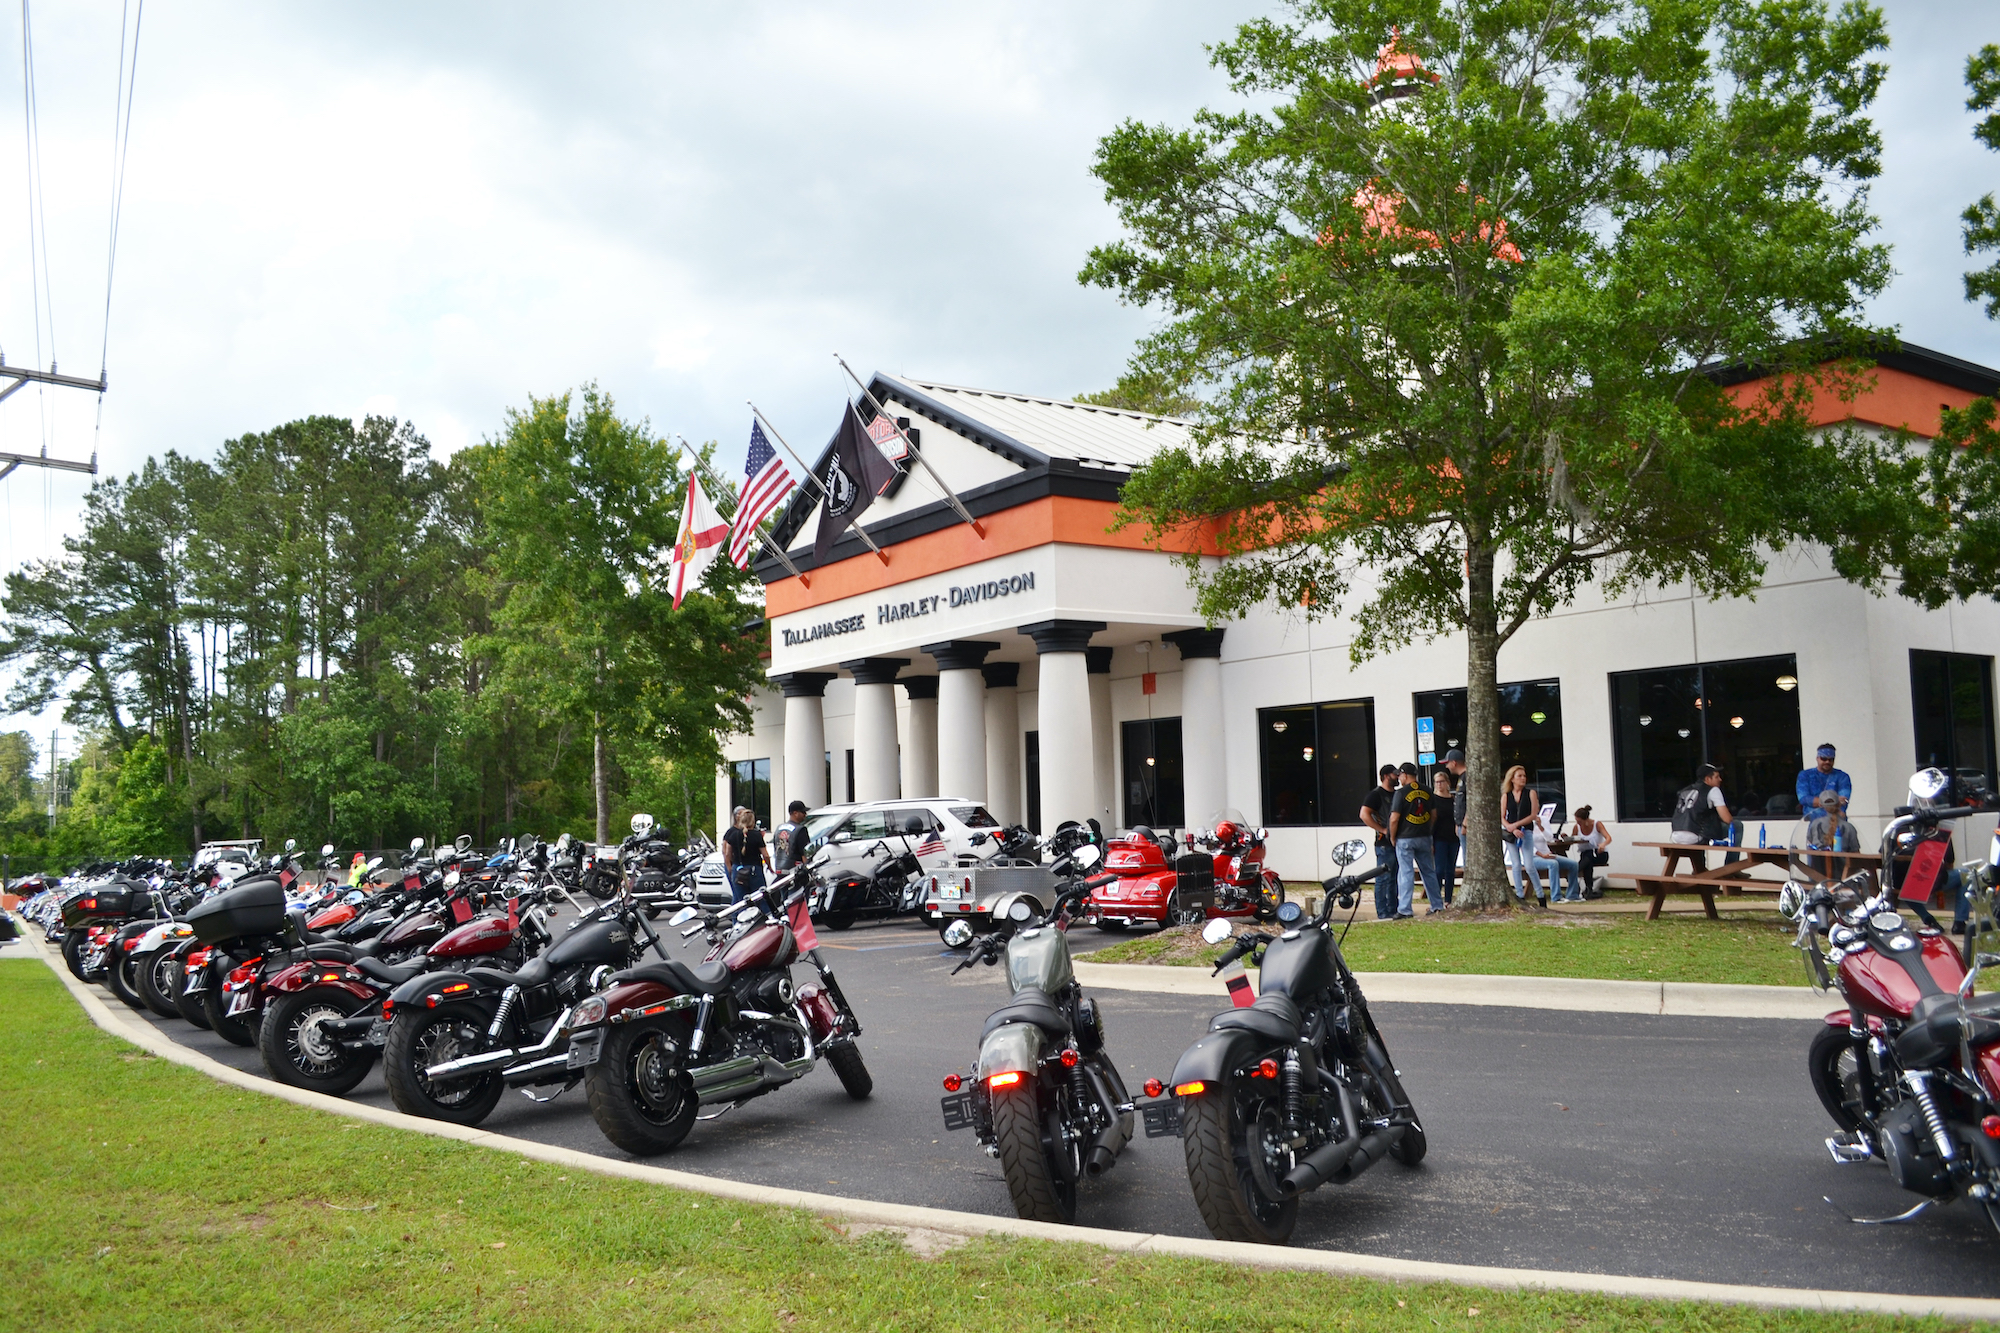 Thank you to local dealerships like Tallahassee Harley-Davidson who are supporting this year’s Tally Bike Fest through sponsored rides and gatherings.